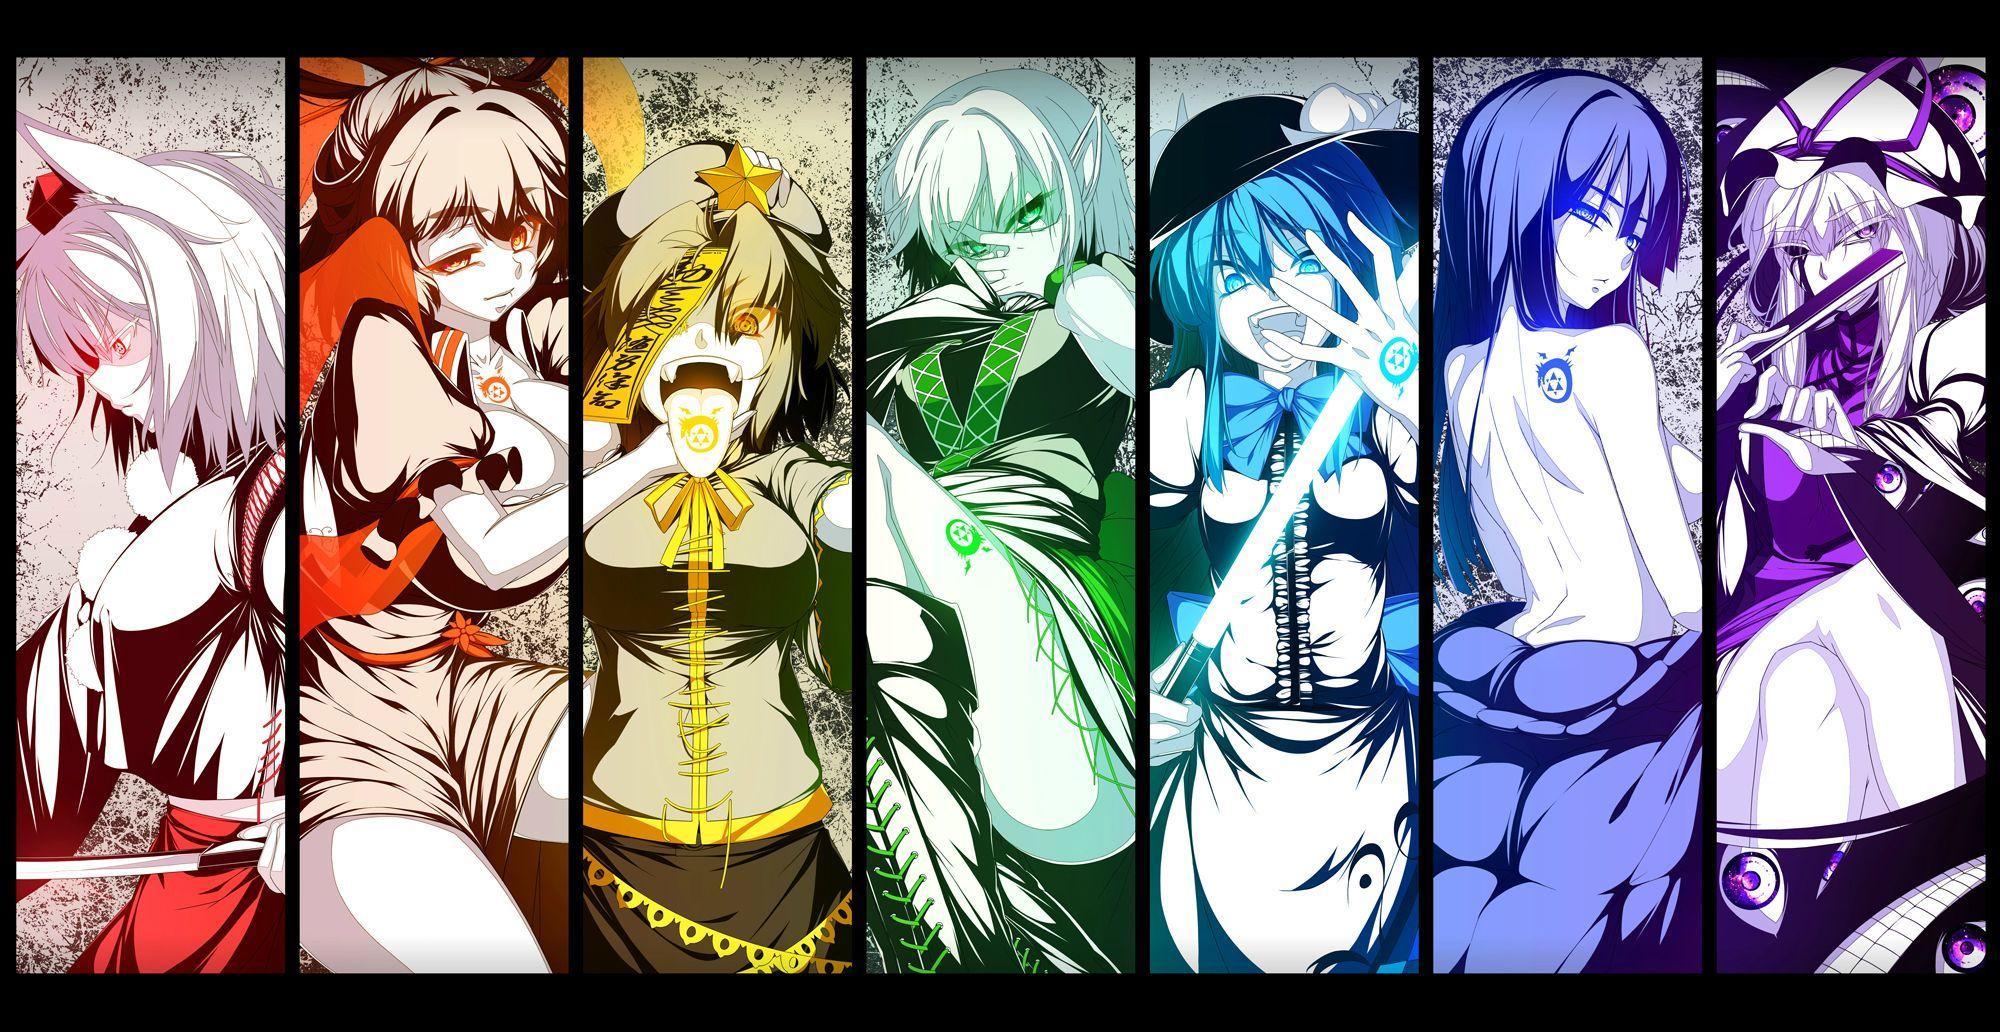 Deadly Sins Wallpaper, High Quality Pics of 7 Deadly Sins